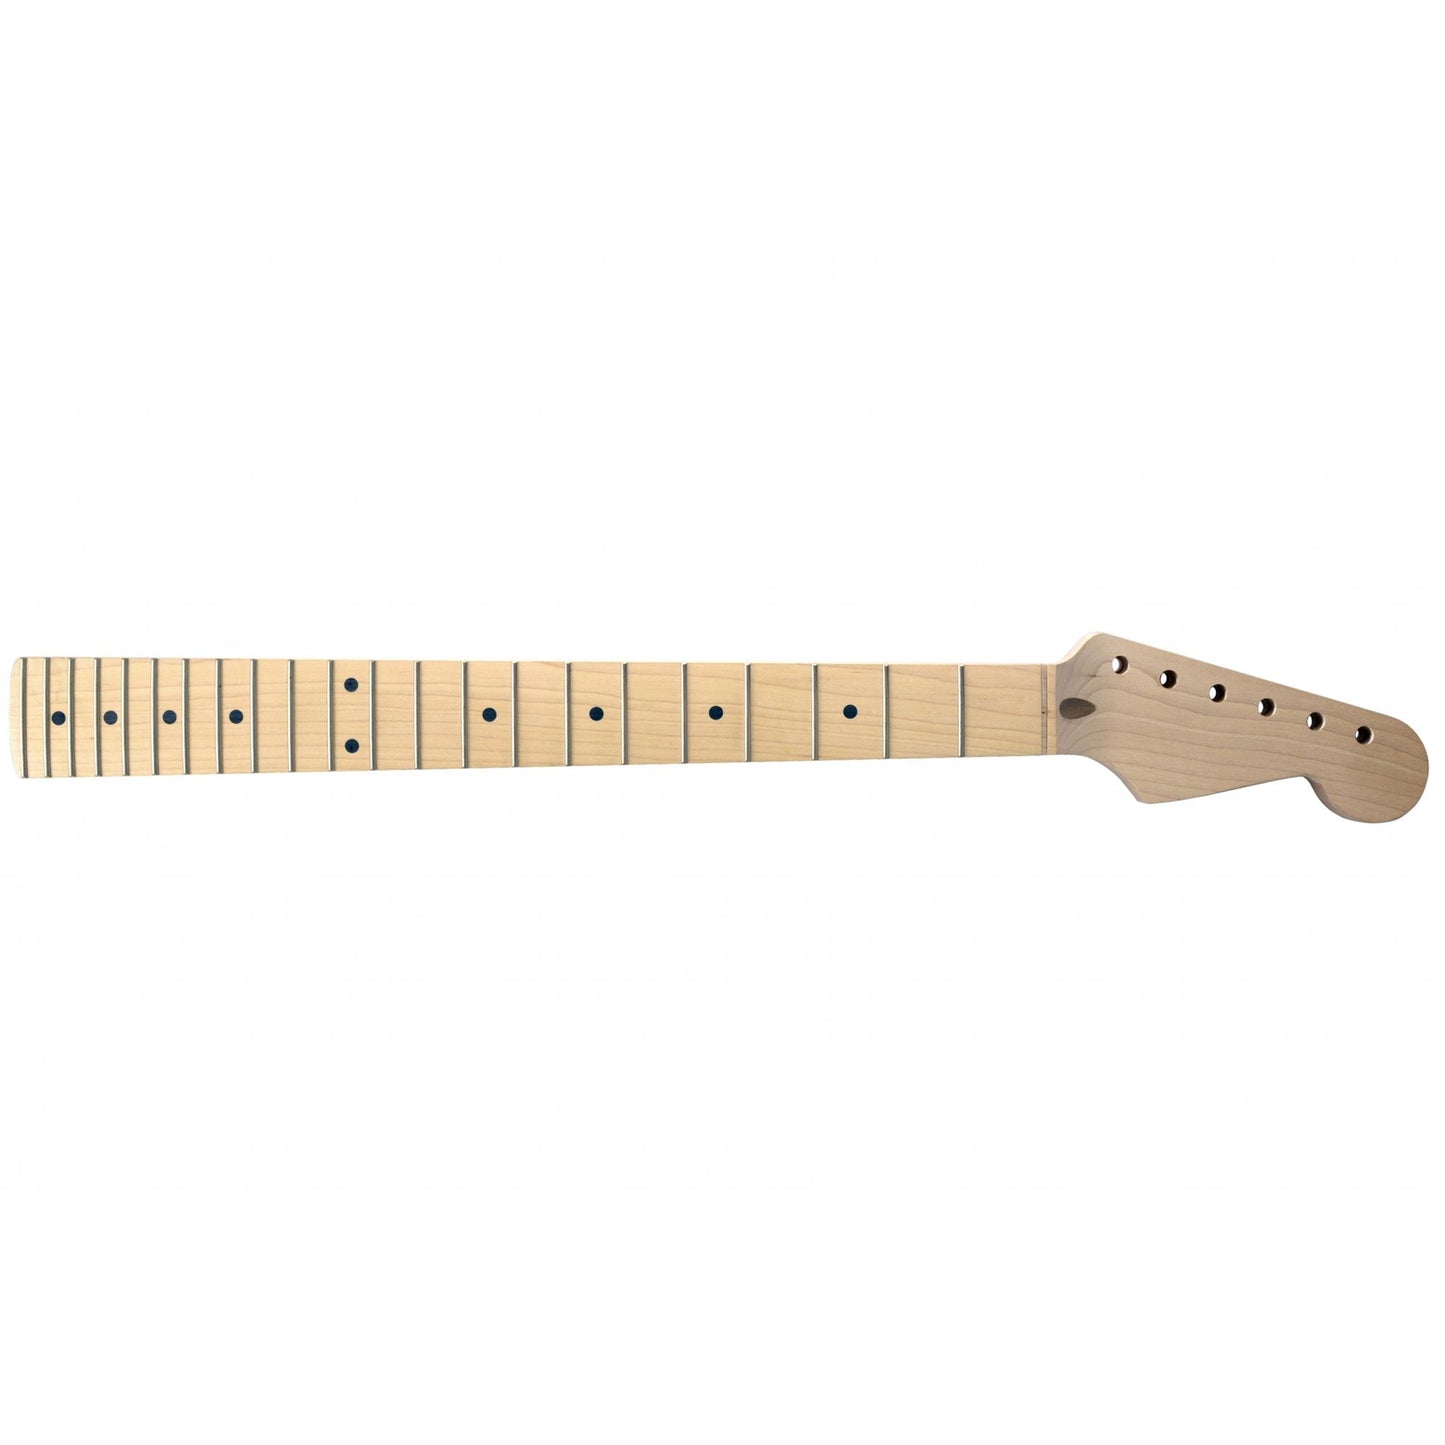 Stratocaster Replacement Contemporary Maple Replacement Neck Unfinished, 22 Fret